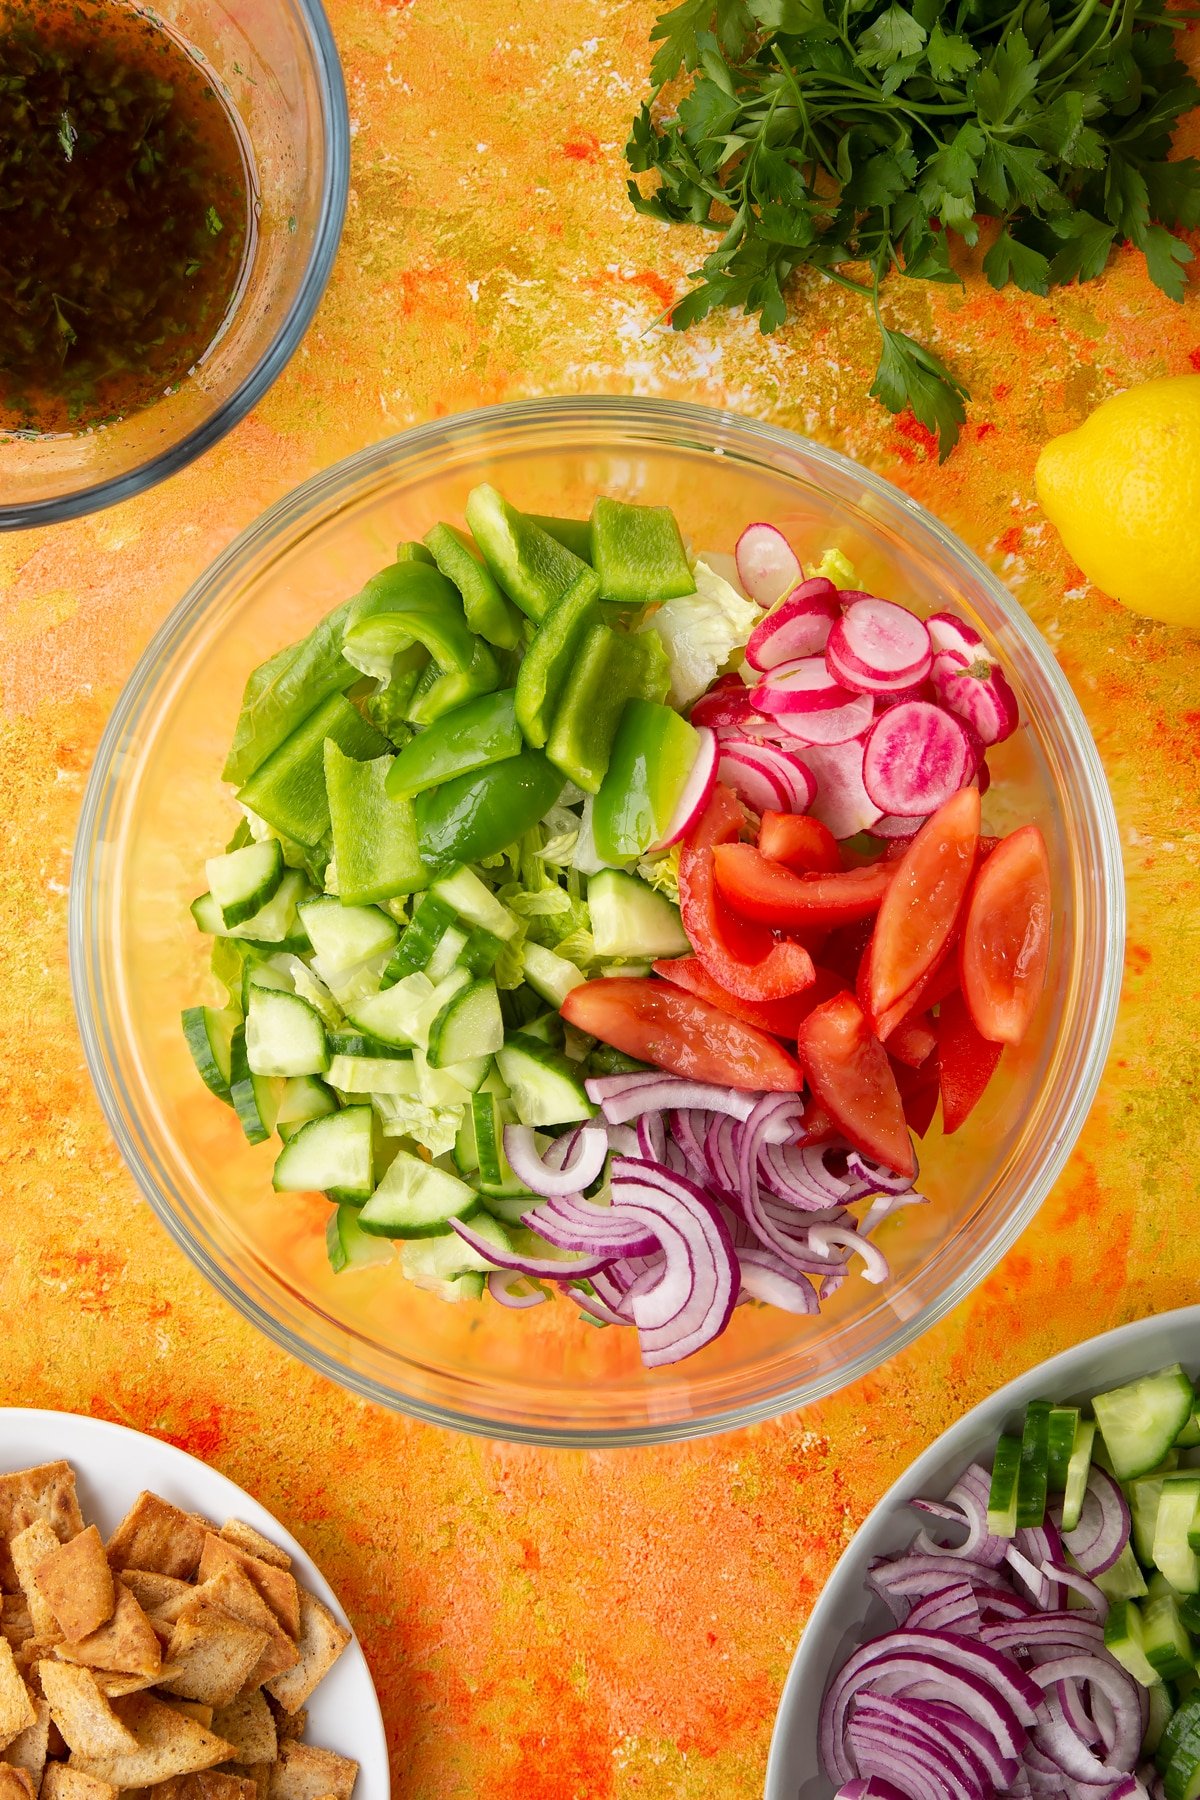 Lettuce, tomatoes, red onion, cucumber, green peppers and radish in a glass mixing bowl. Ingredients to make vegan fattoush surround the bowl.